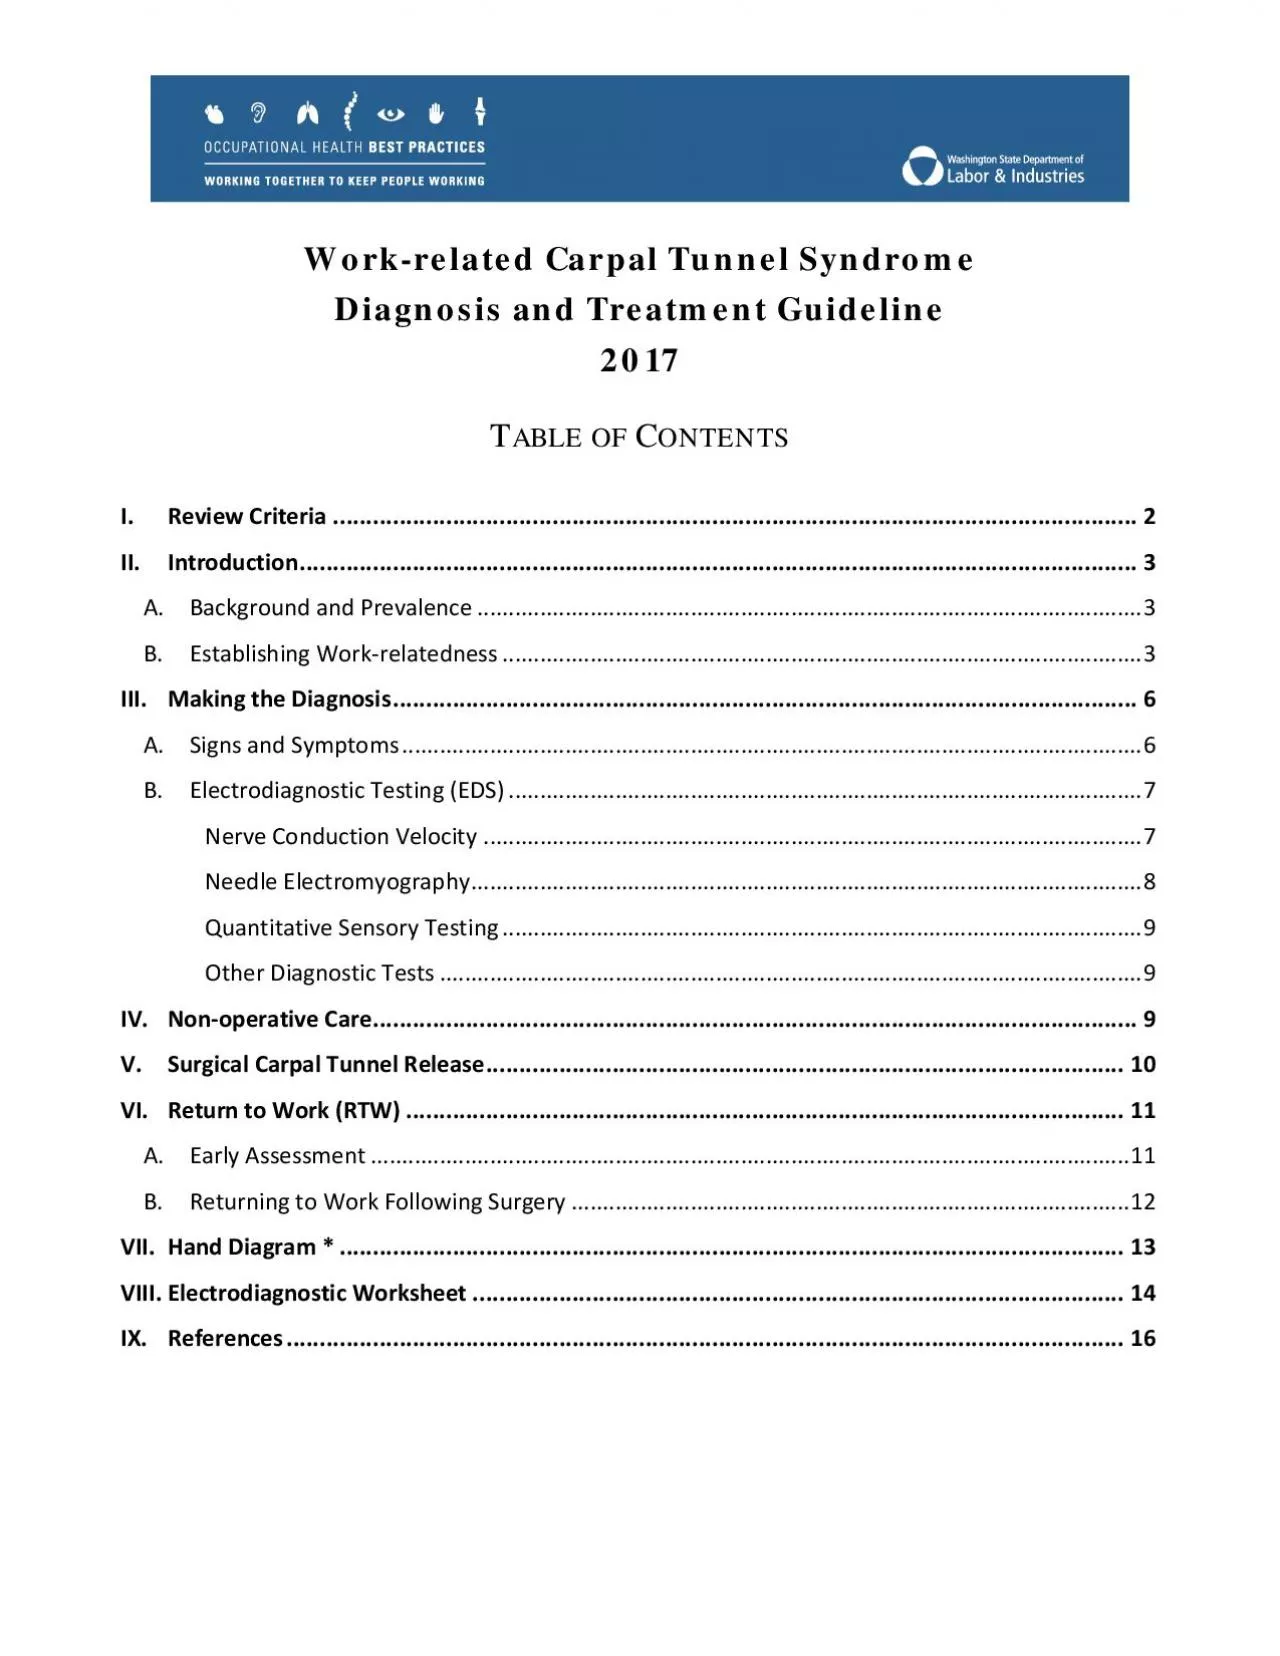 Workrelated Carpal Tunnel SyndromeDiagnosis and Treatment GuidelineABL